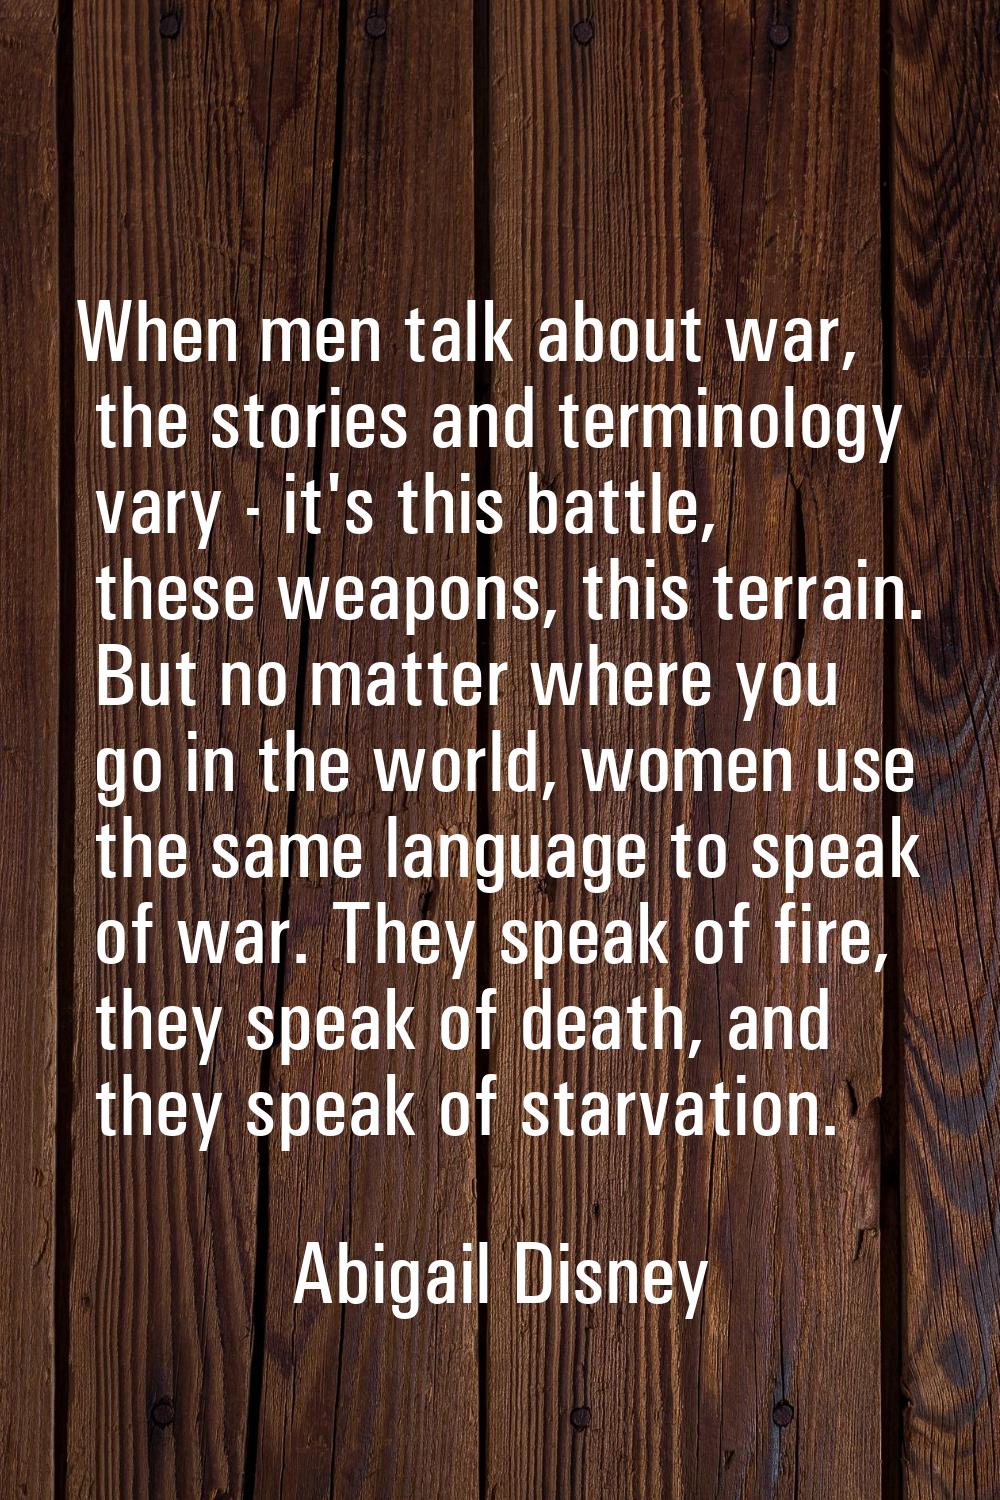 When men talk about war, the stories and terminology vary - it's this battle, these weapons, this t